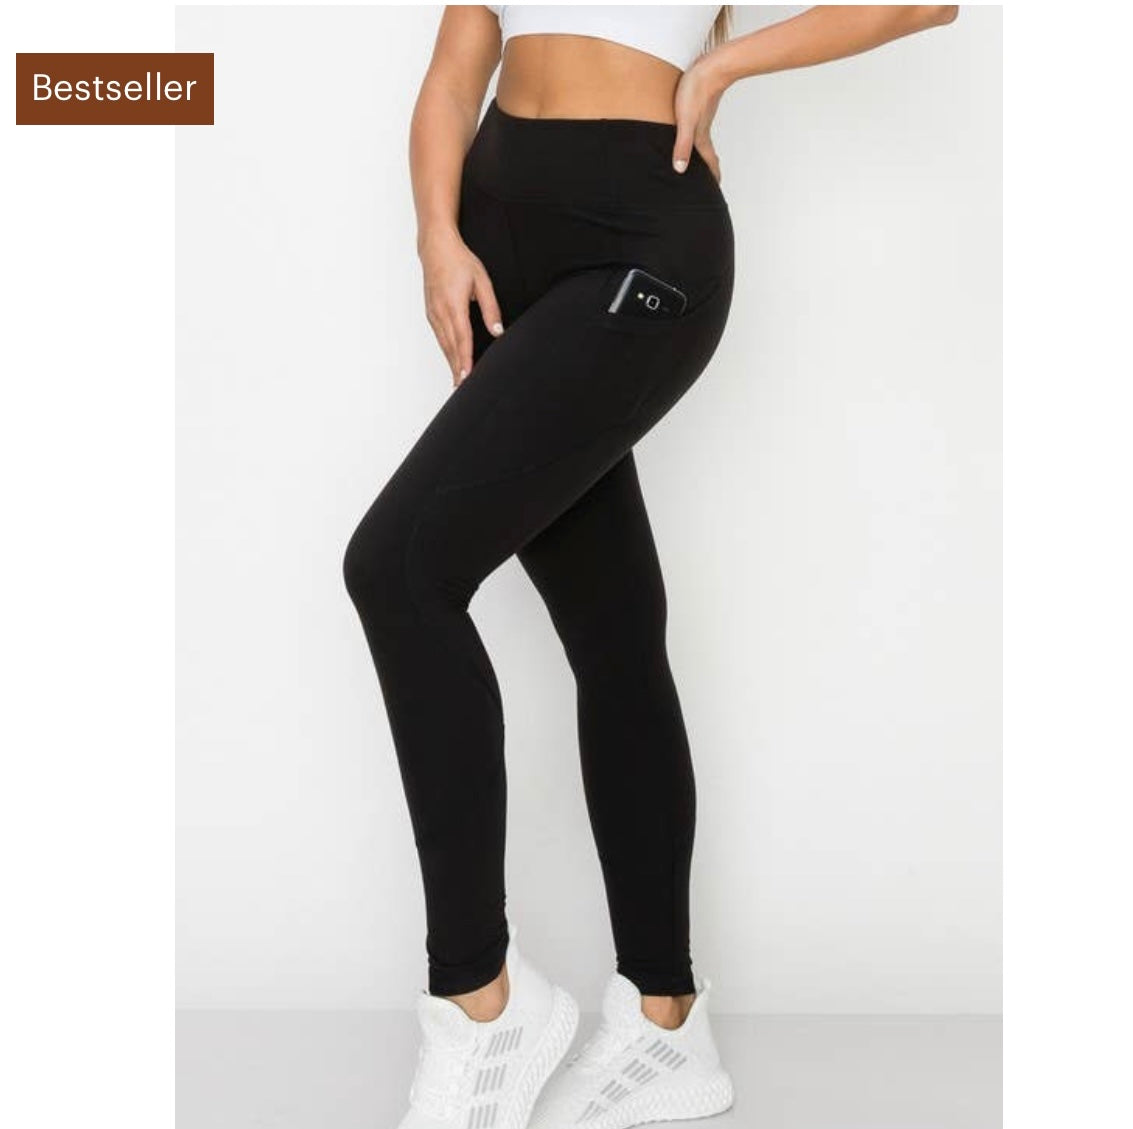 The Heathyoga Bootcut Yoga Pants Are on Sale at Amazon for Just $20